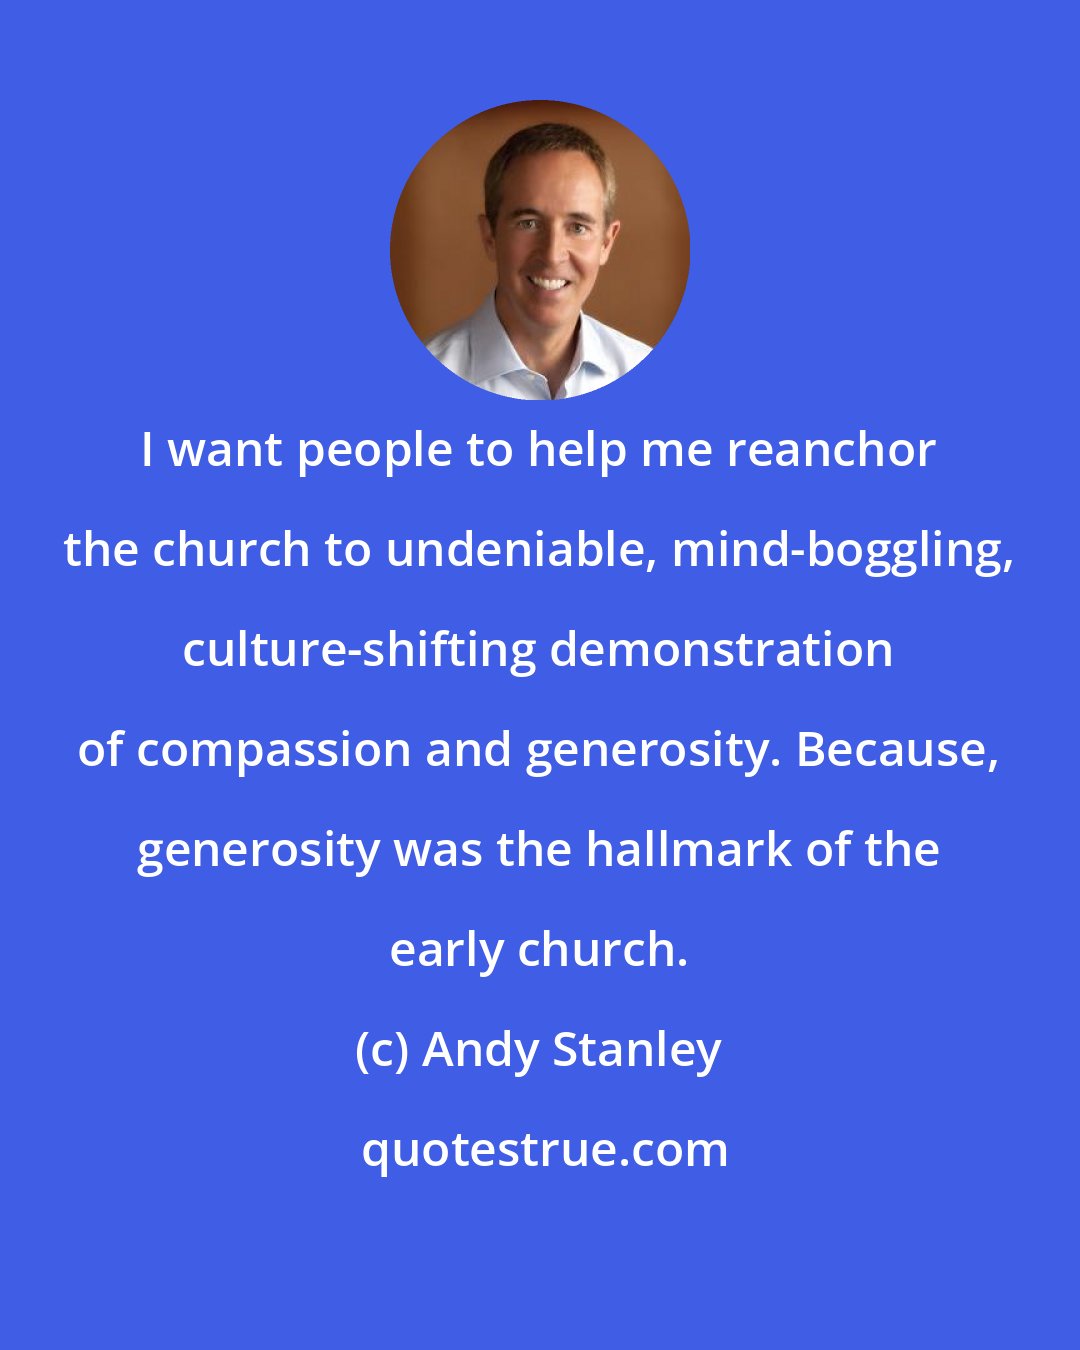 Andy Stanley: I want people to help me reanchor the church to undeniable, mind-boggling, culture-shifting demonstration of compassion and generosity. Because, generosity was the hallmark of the early church.